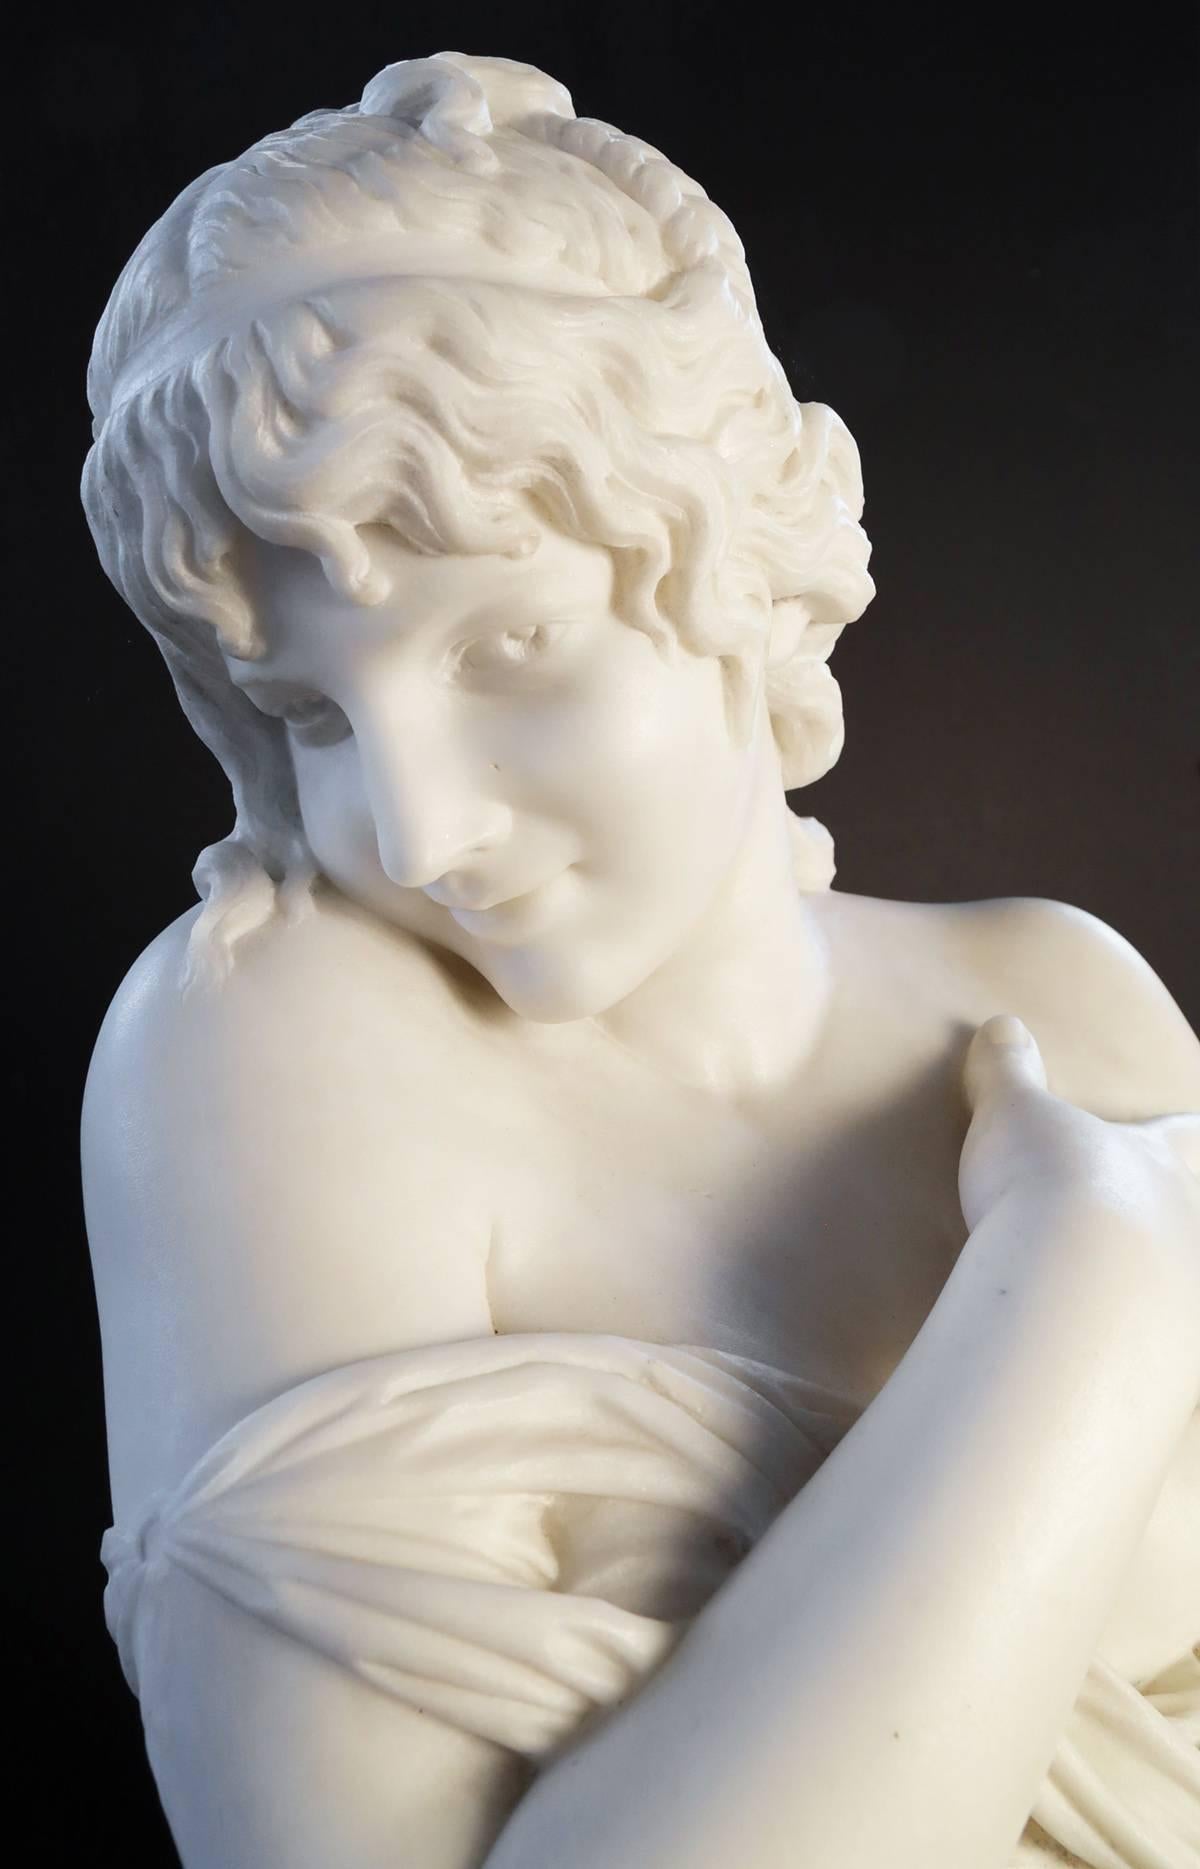 A Carved Marble Bust of a Demure Young Girl - Sculpture by Pieter Barranti